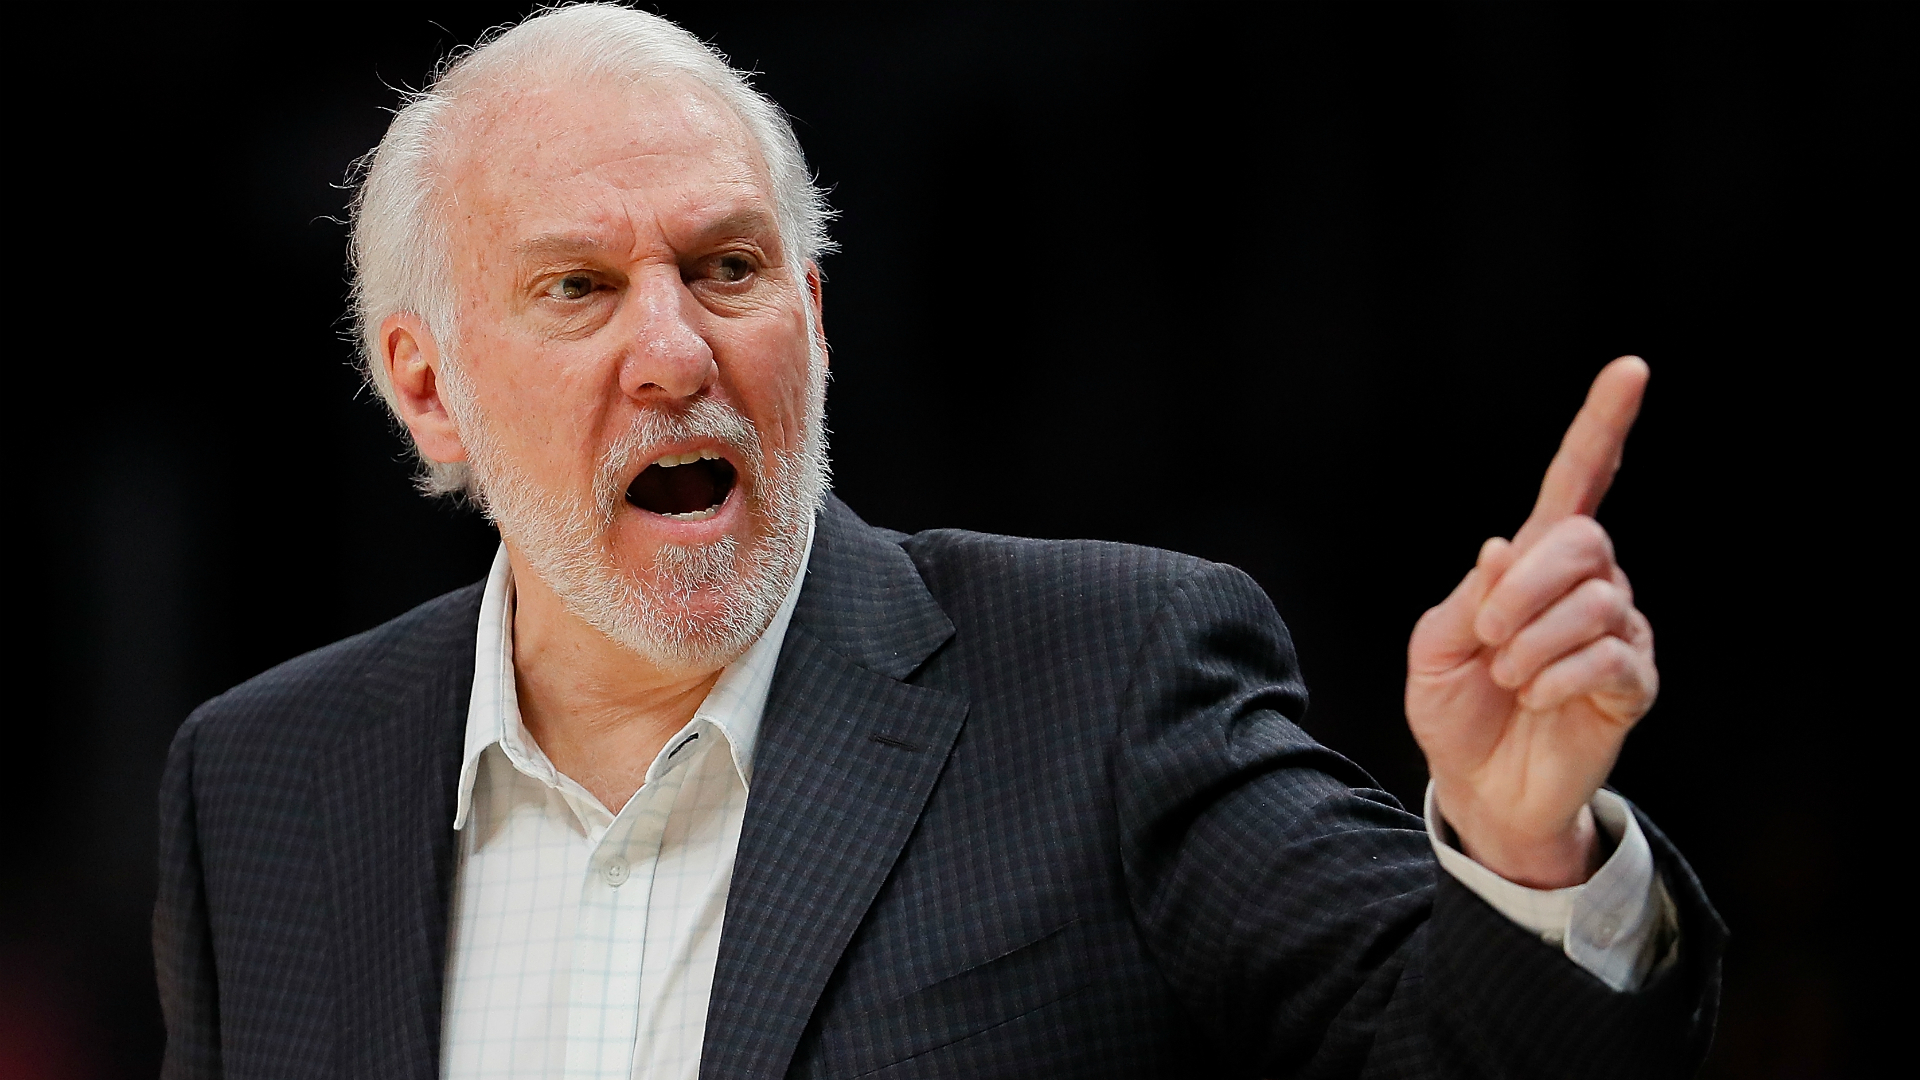 Gregg Popovich responded to criticism from United States president Donald Trump.